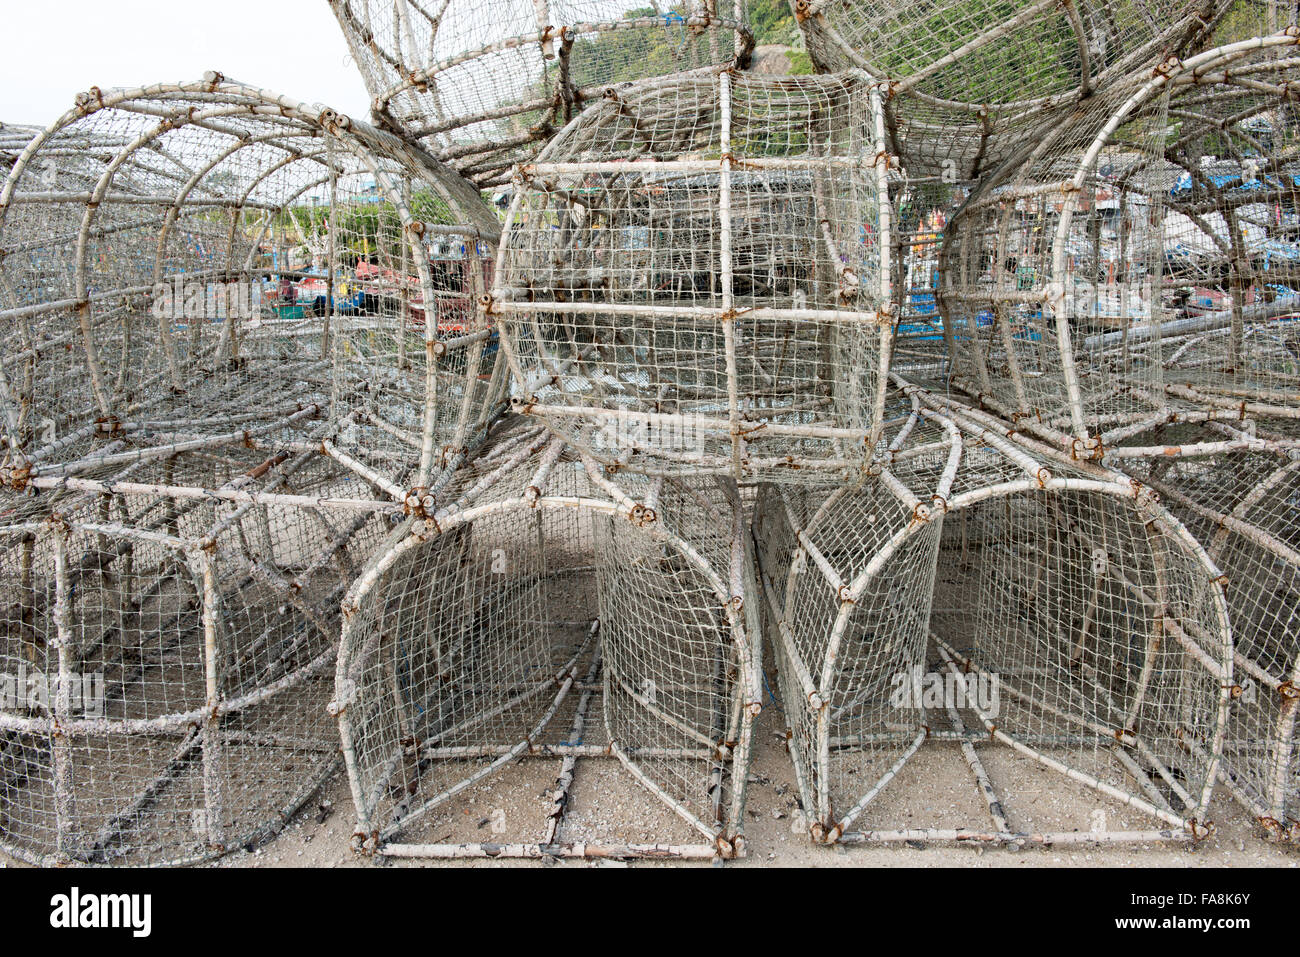 Old Fish Trap In Fishing Village Stock Photo, Picture and Royalty Free  Image. Image 49702374.